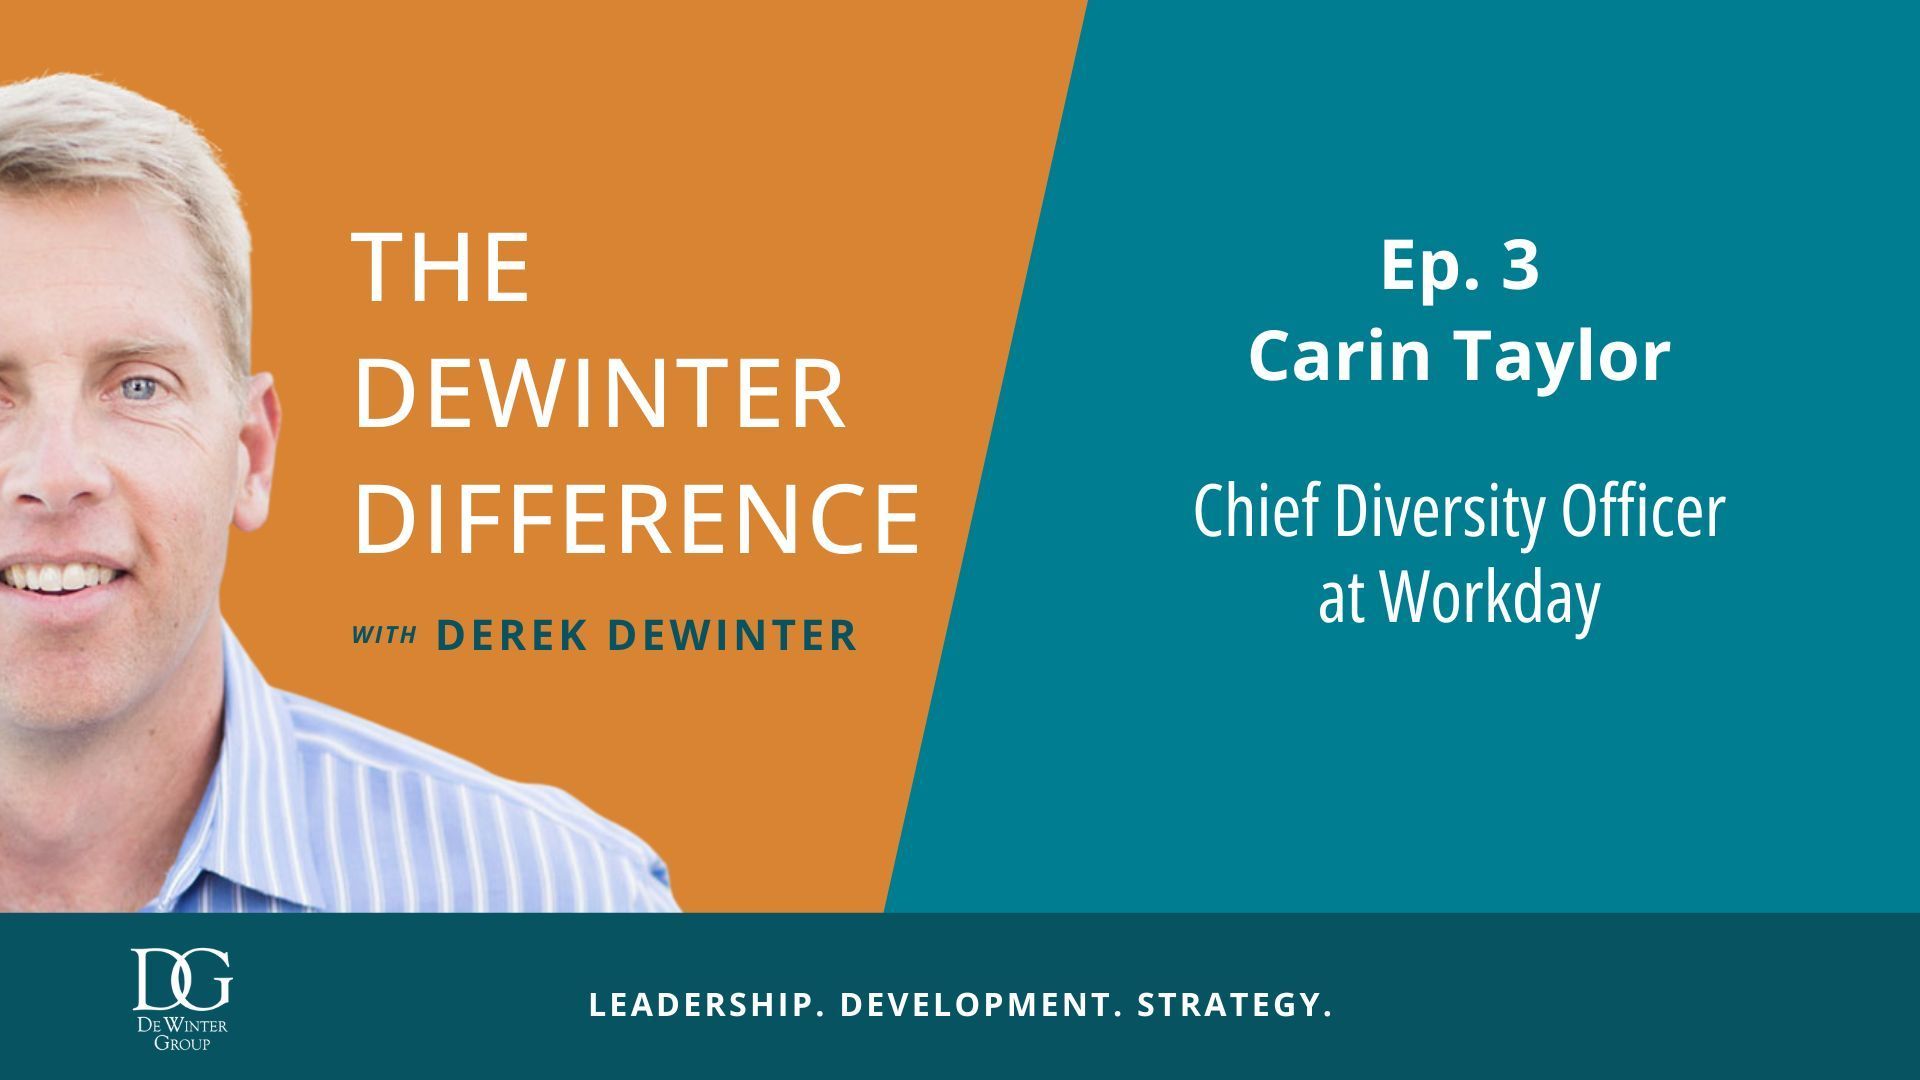 The DeWinter Difference: Carin Taylor, Chief Diversity Officer at Workday